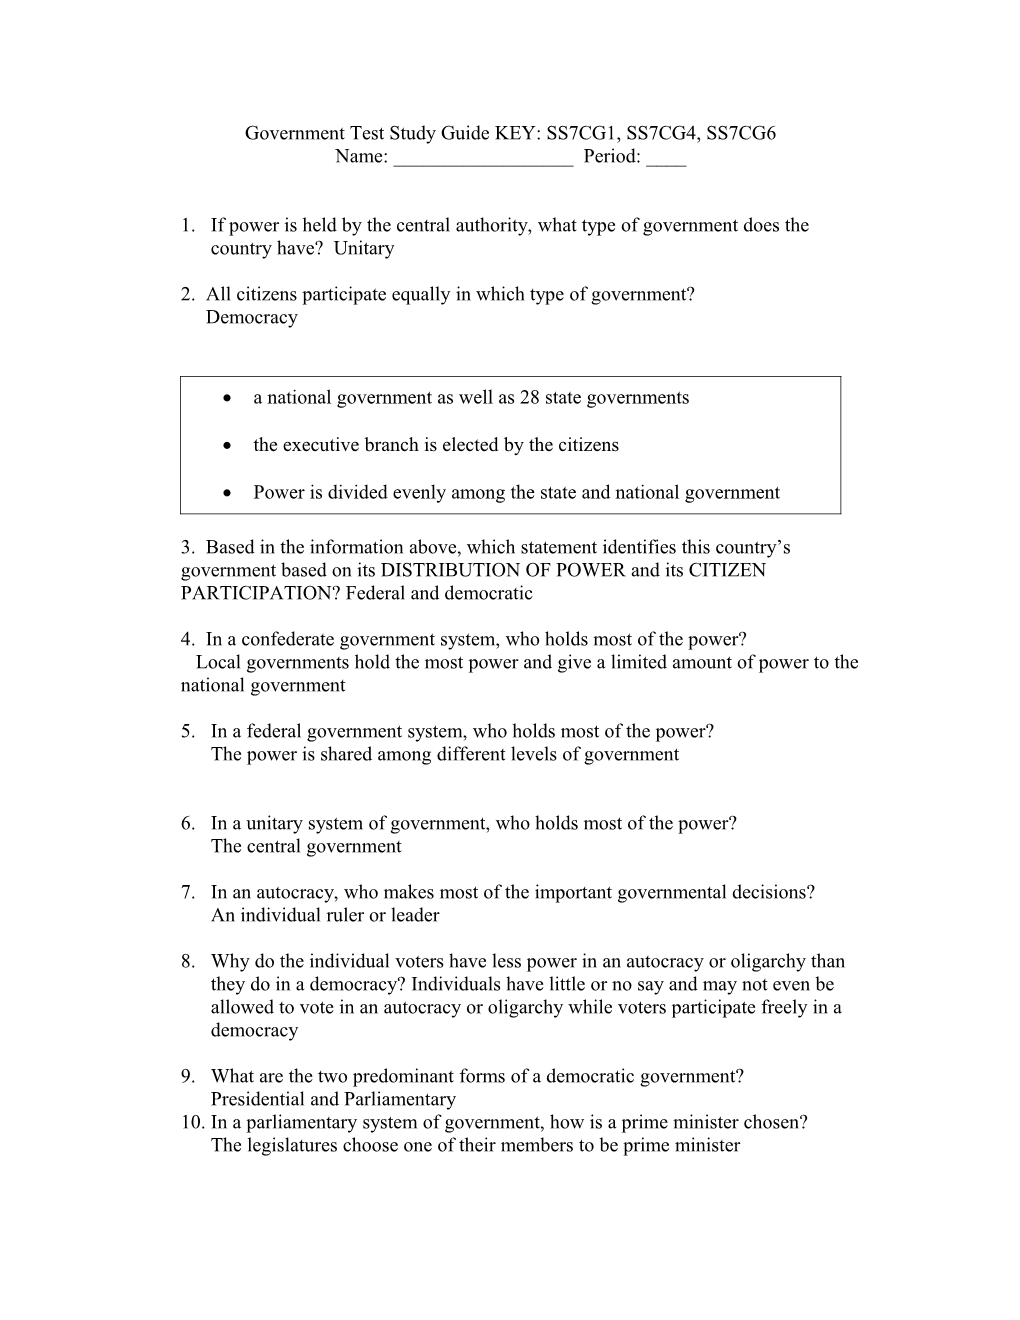 Government Test Study Guide KEY: SS7CG1, SS7CG4, SS7CG6